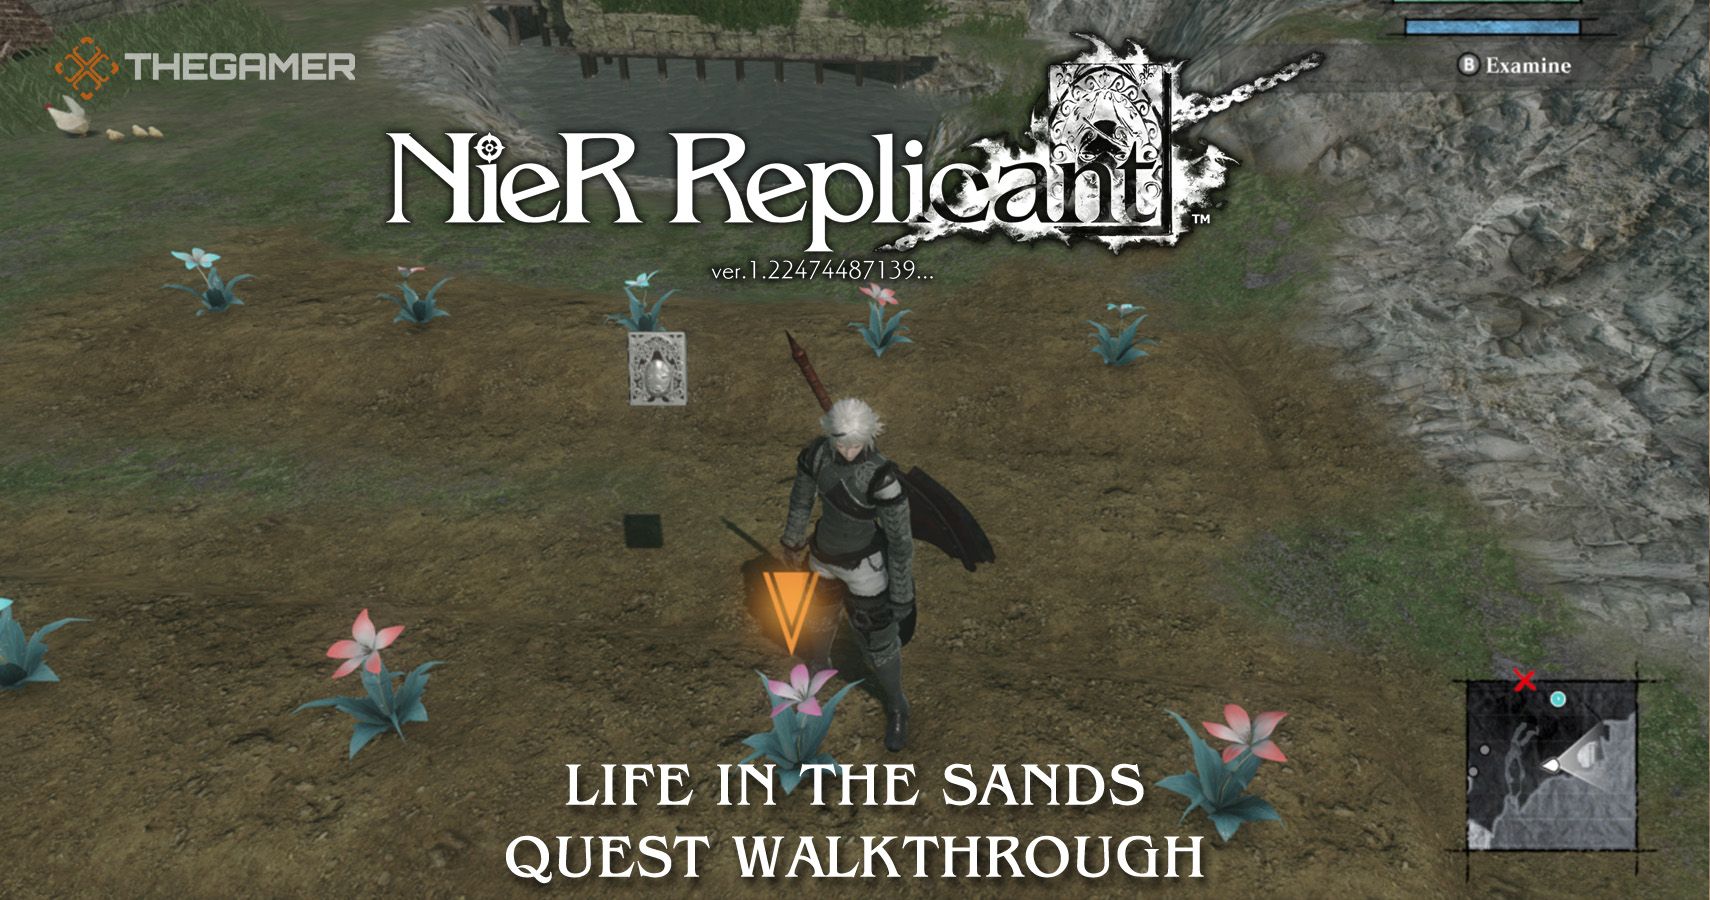 Nier Replicant: The Magical Stone Quest Guide